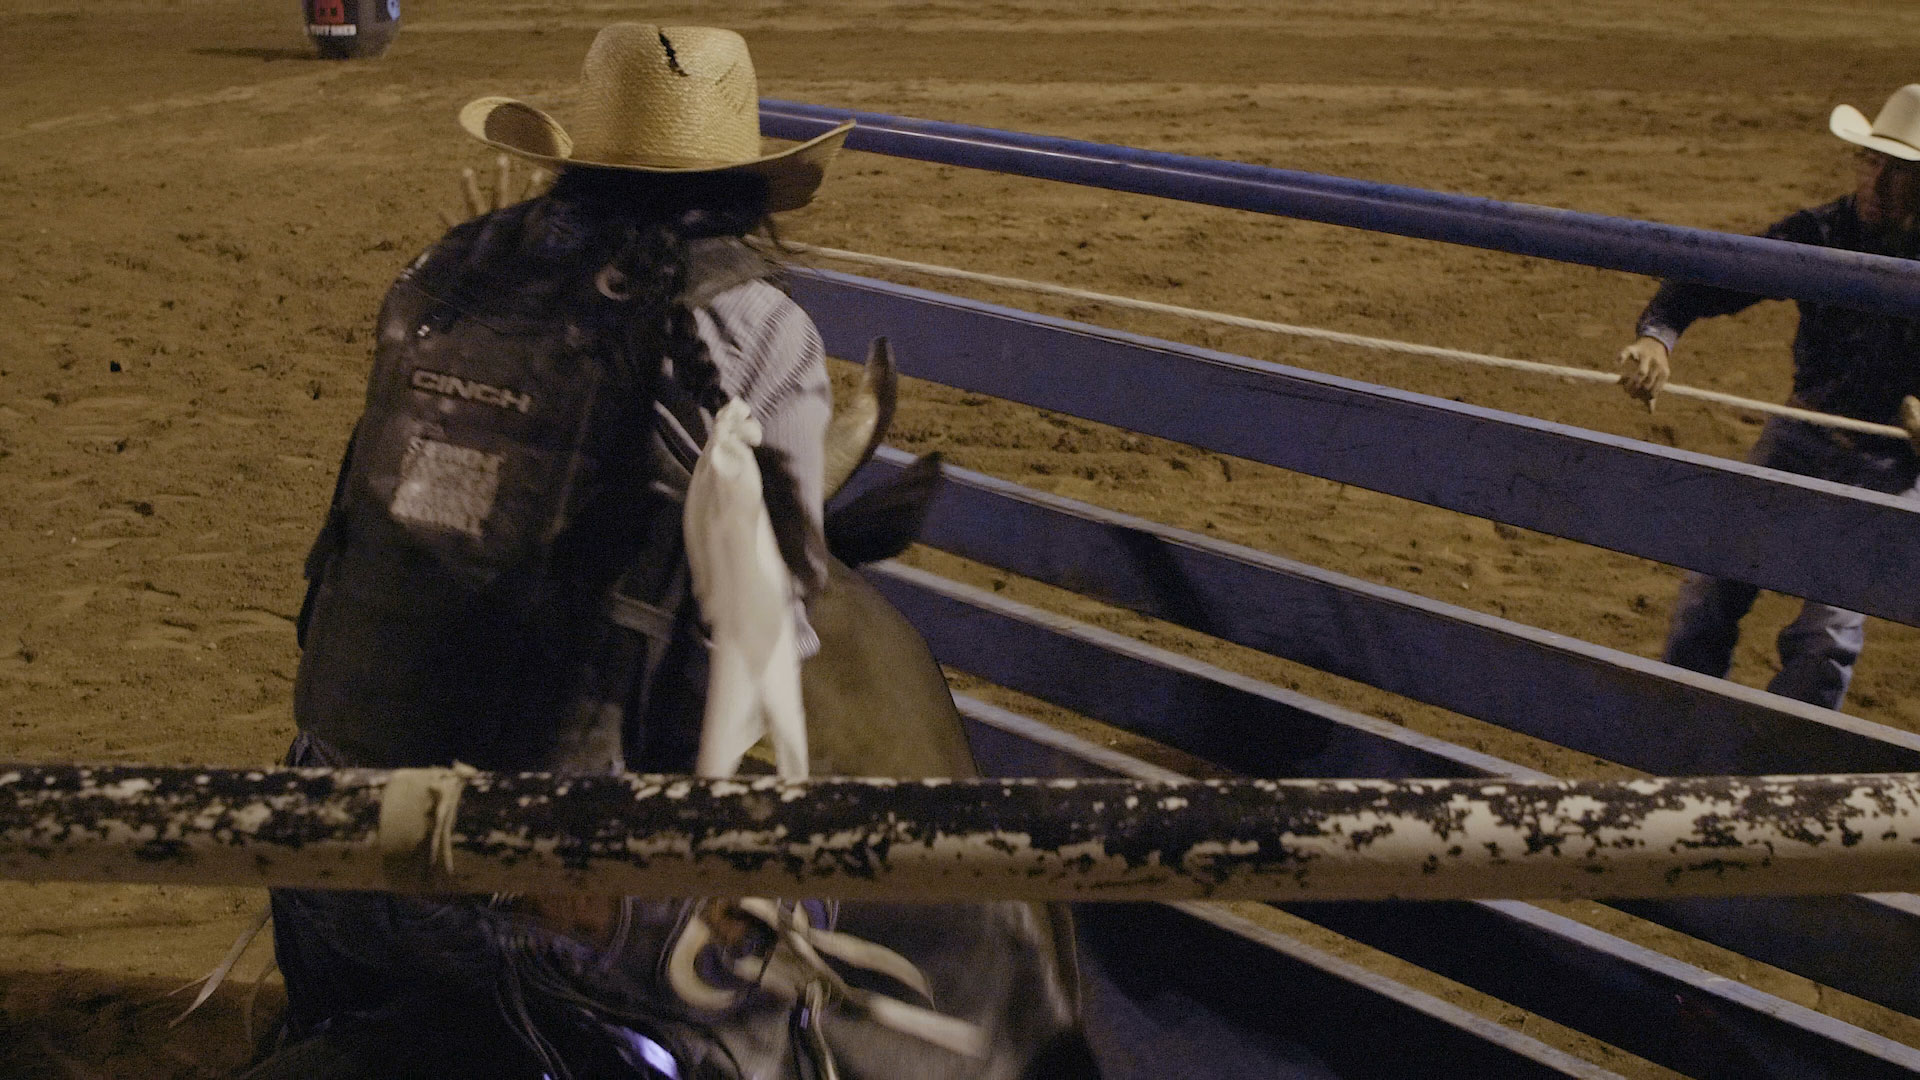 Man at rodeo, cover image from "Bucking on the Rez"